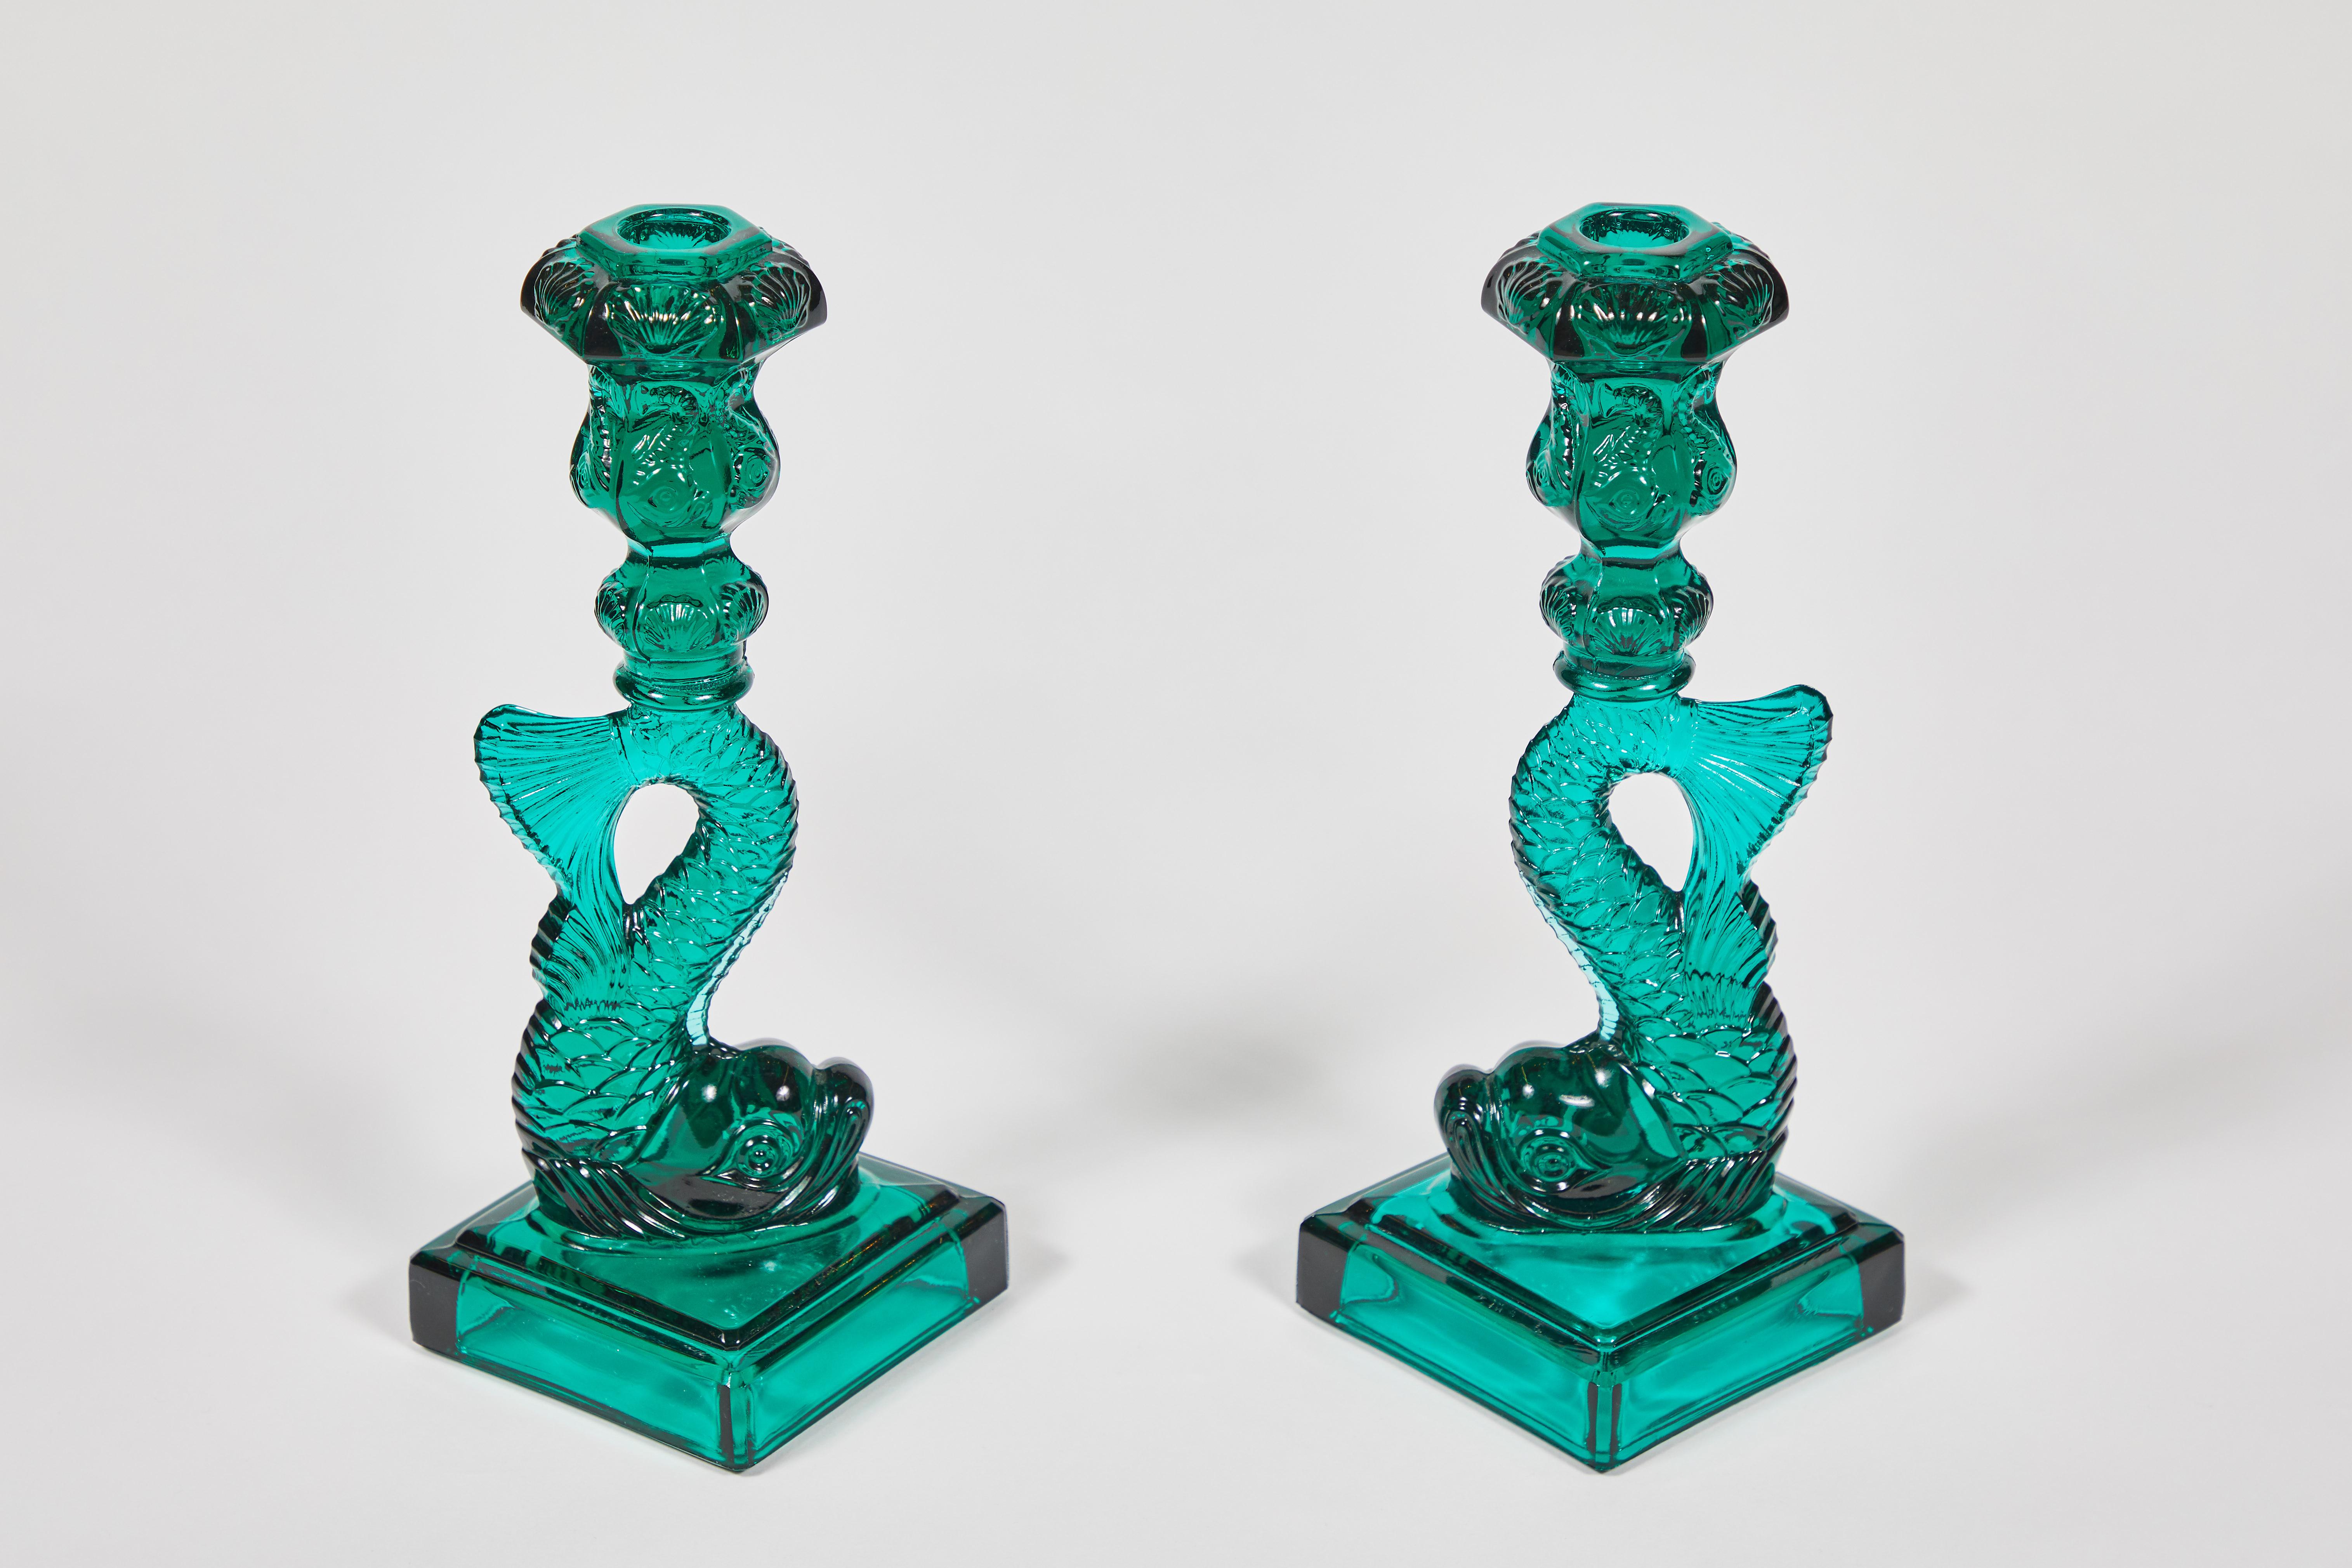 This 1970s imperial glass reproduction of a late 1800s dauphin candlestick design now qualifies as vintage itself. The Metropolitan Museum of Art Met Store sold limited edition sandwich glass style koi fish candlesticks in a range of colors; MMA is